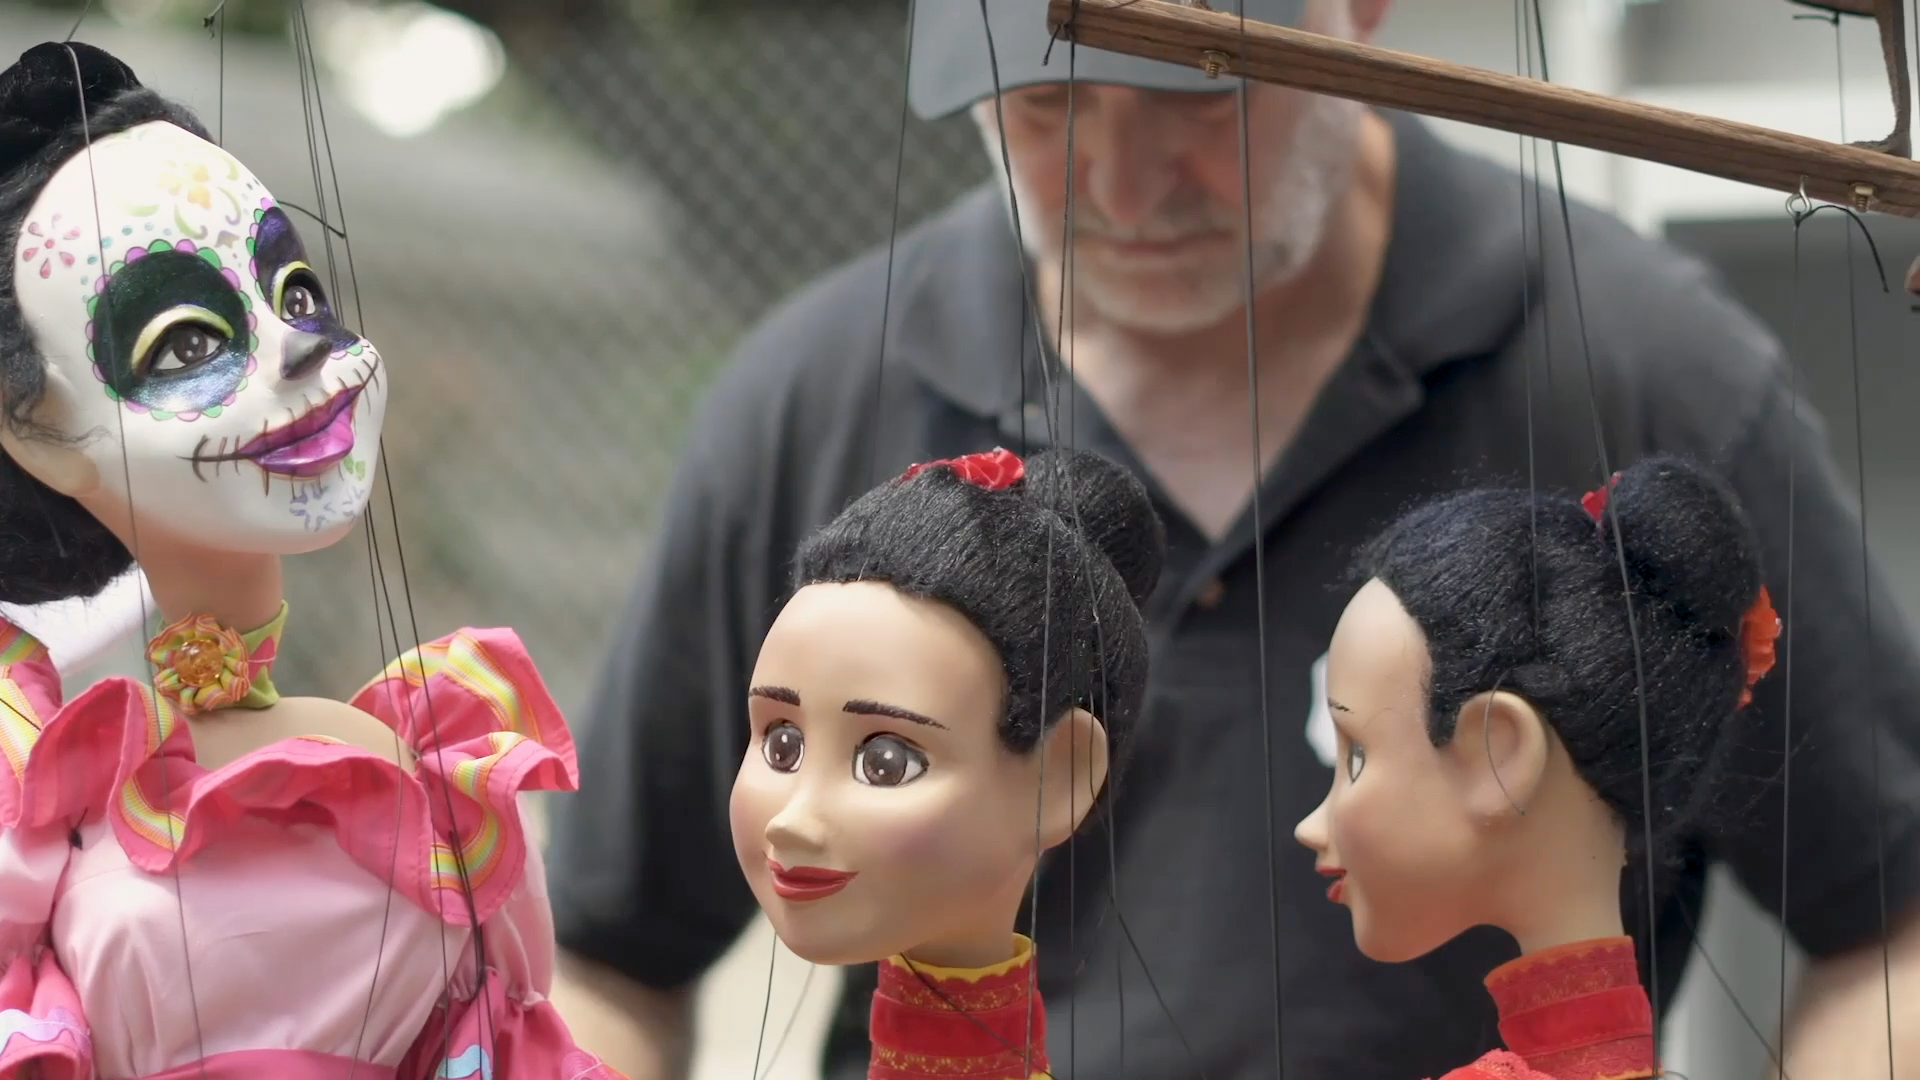 Over 100 marionettes come to life to celebrate a fiesta of color at the 2019 State Fair of Texas.